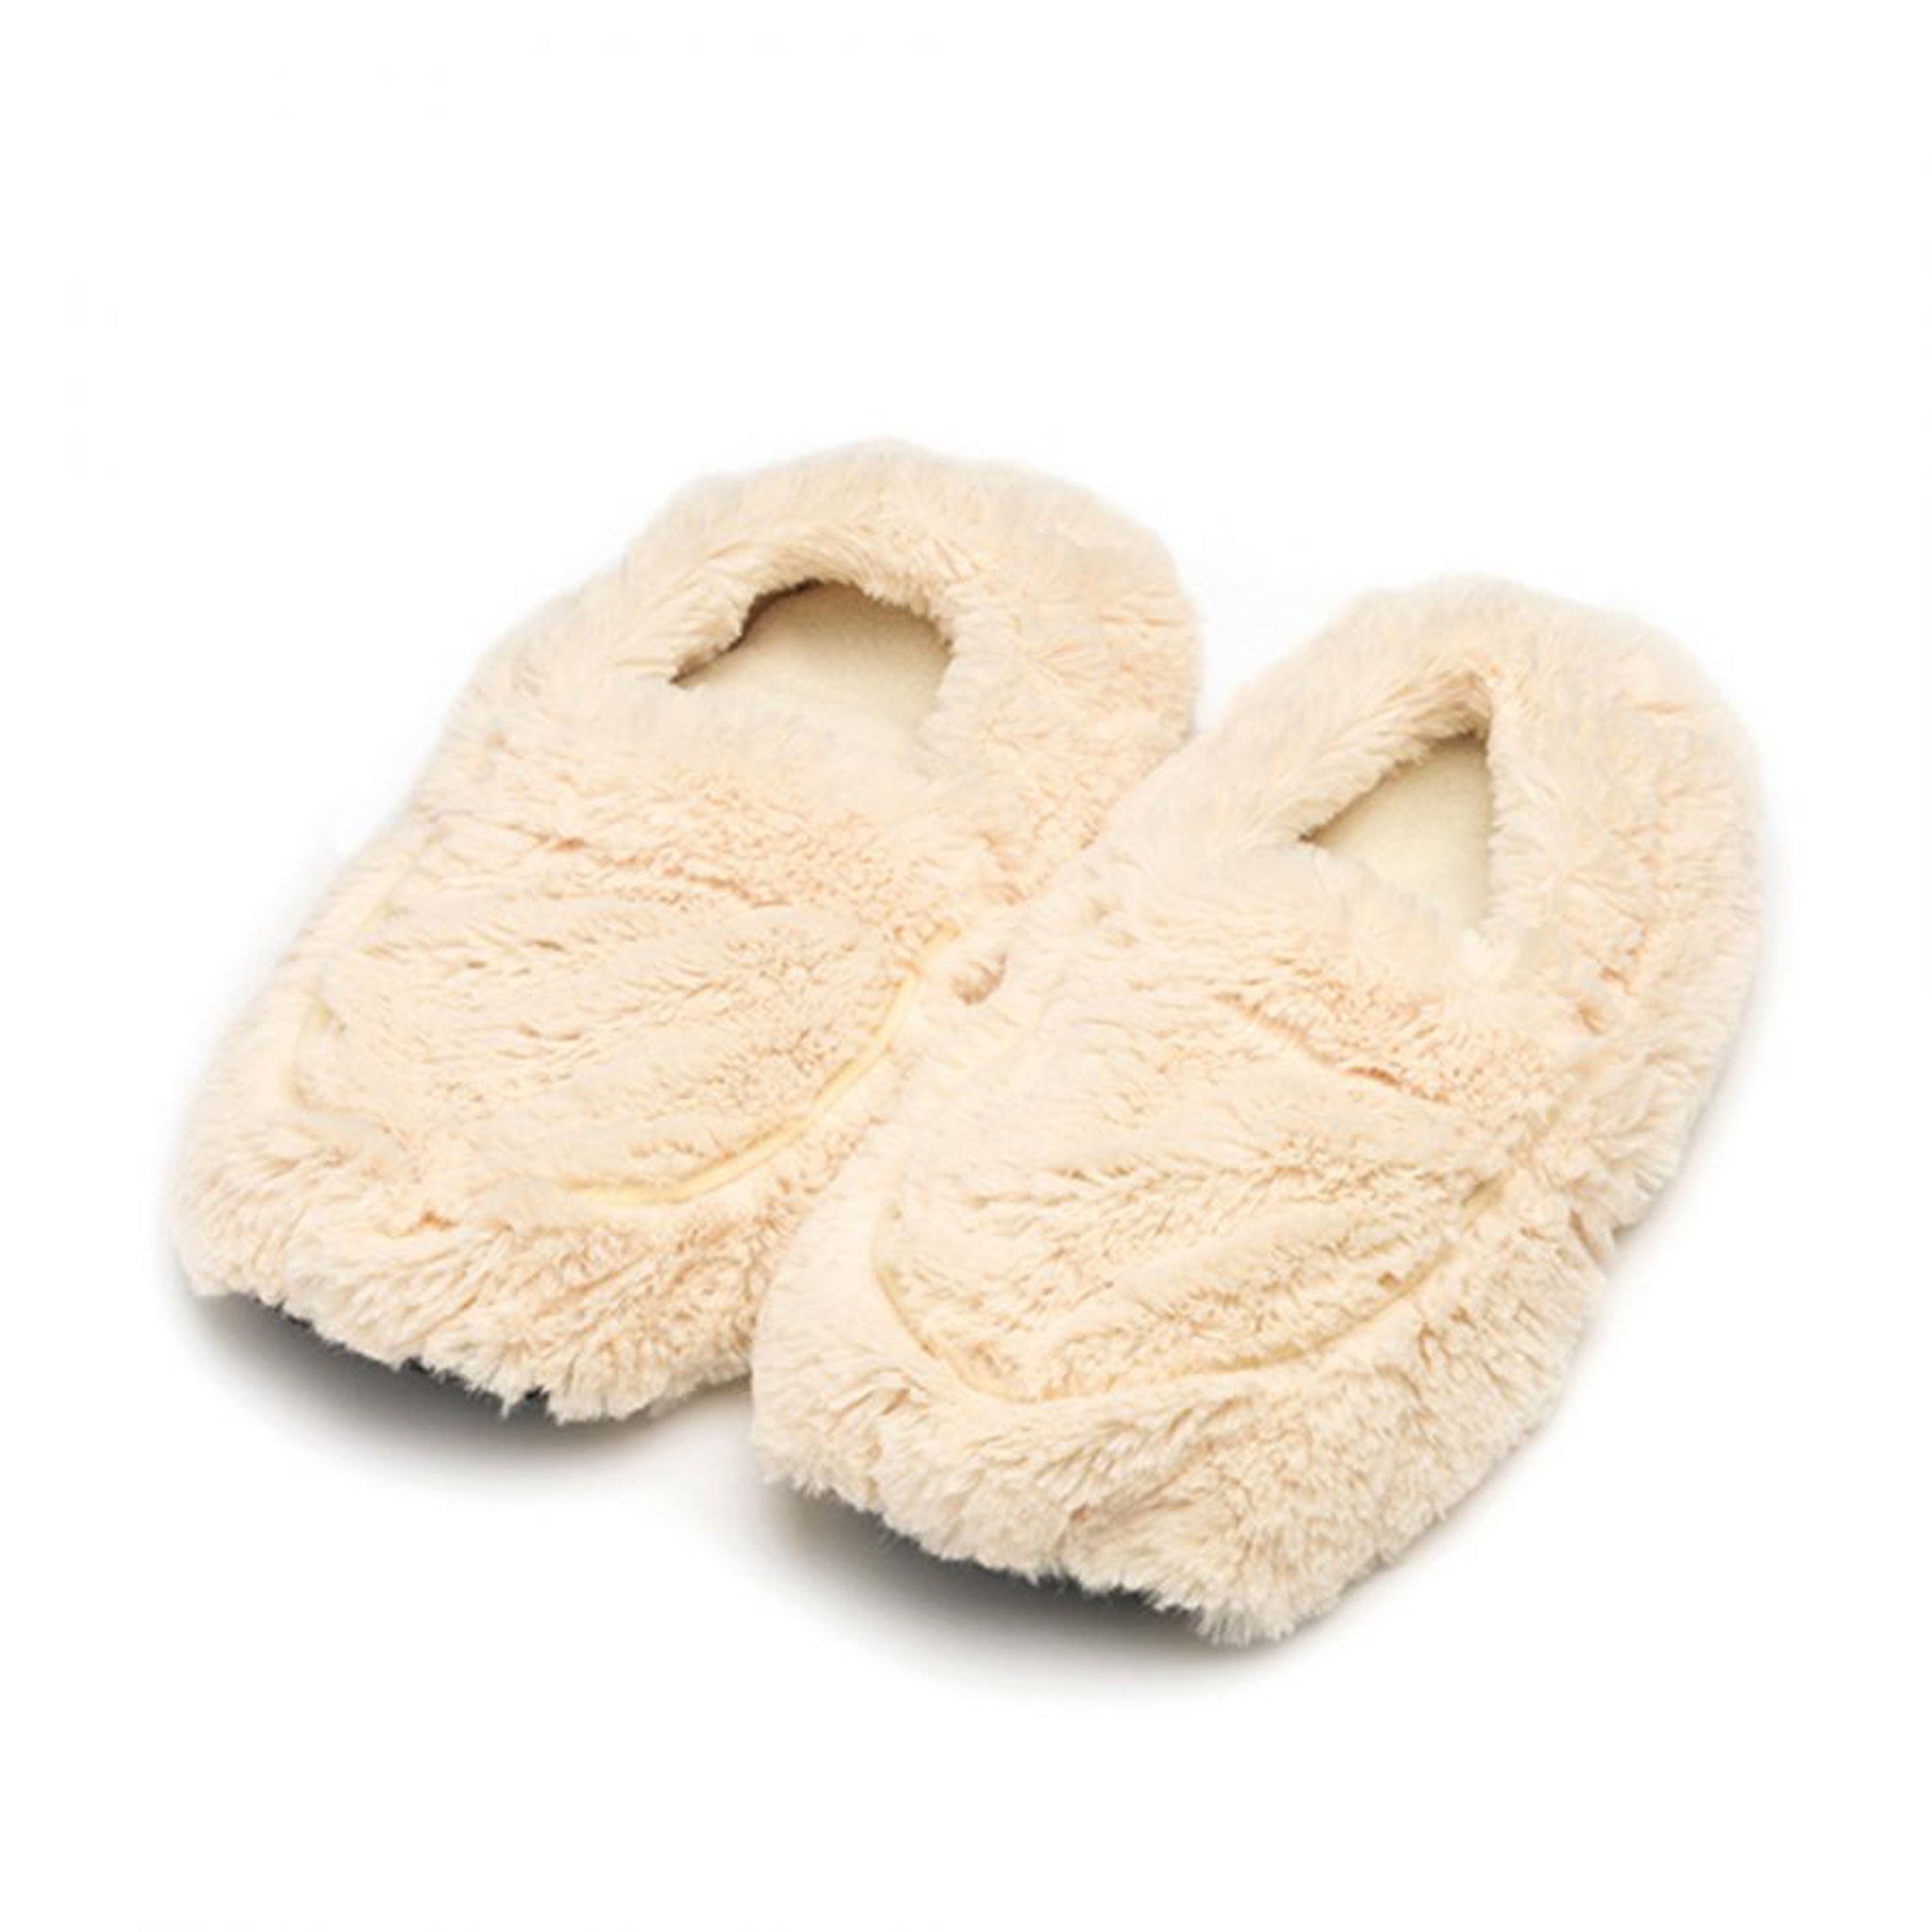 warmies slippers in cream